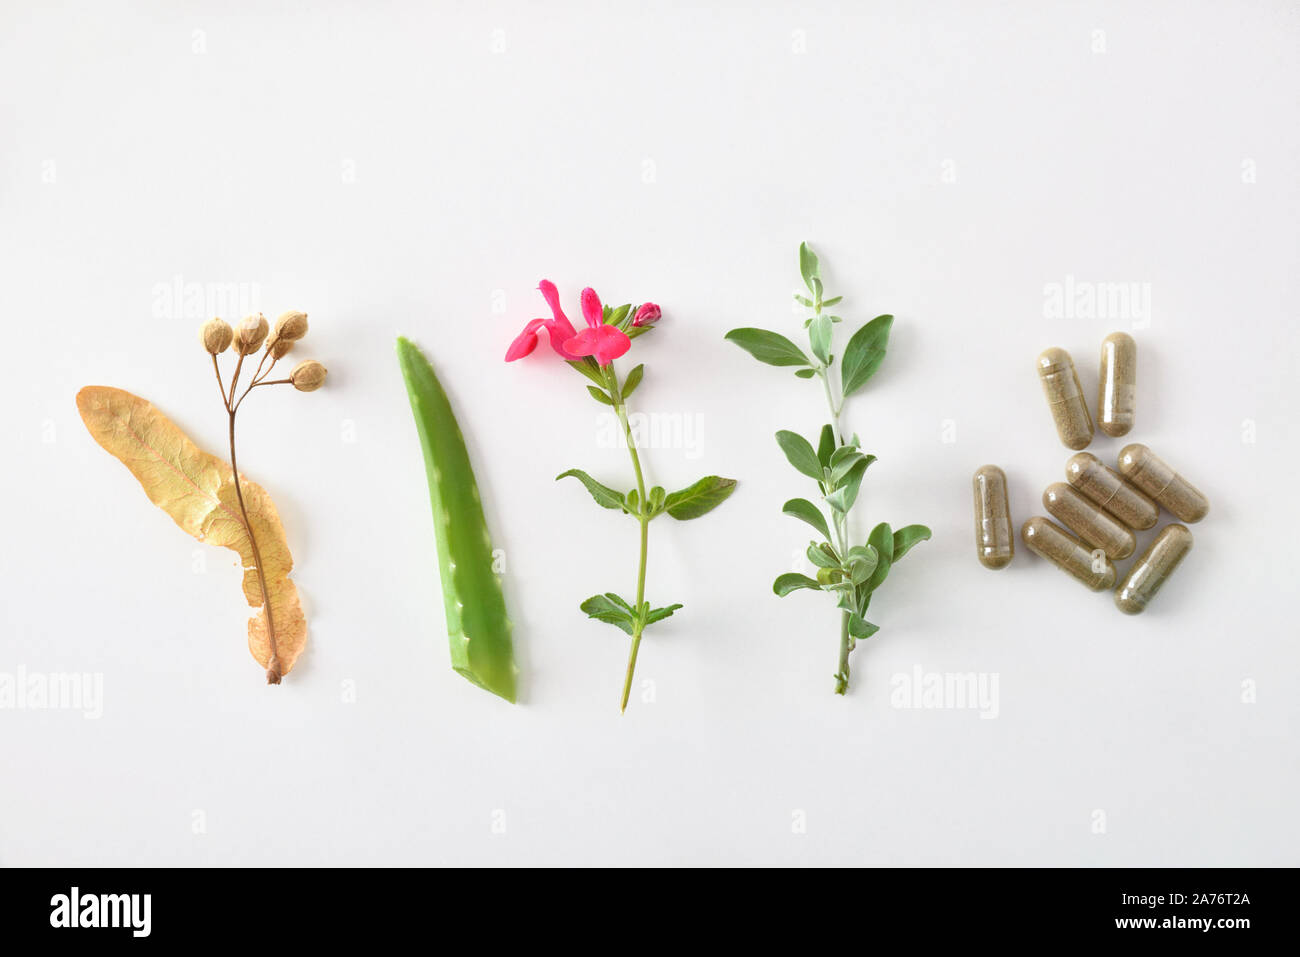 Concept of traditional natural medicine with plants and natural capsules on white table. Natural medicine concept. Top view. Horizontal composition. Stock Photo